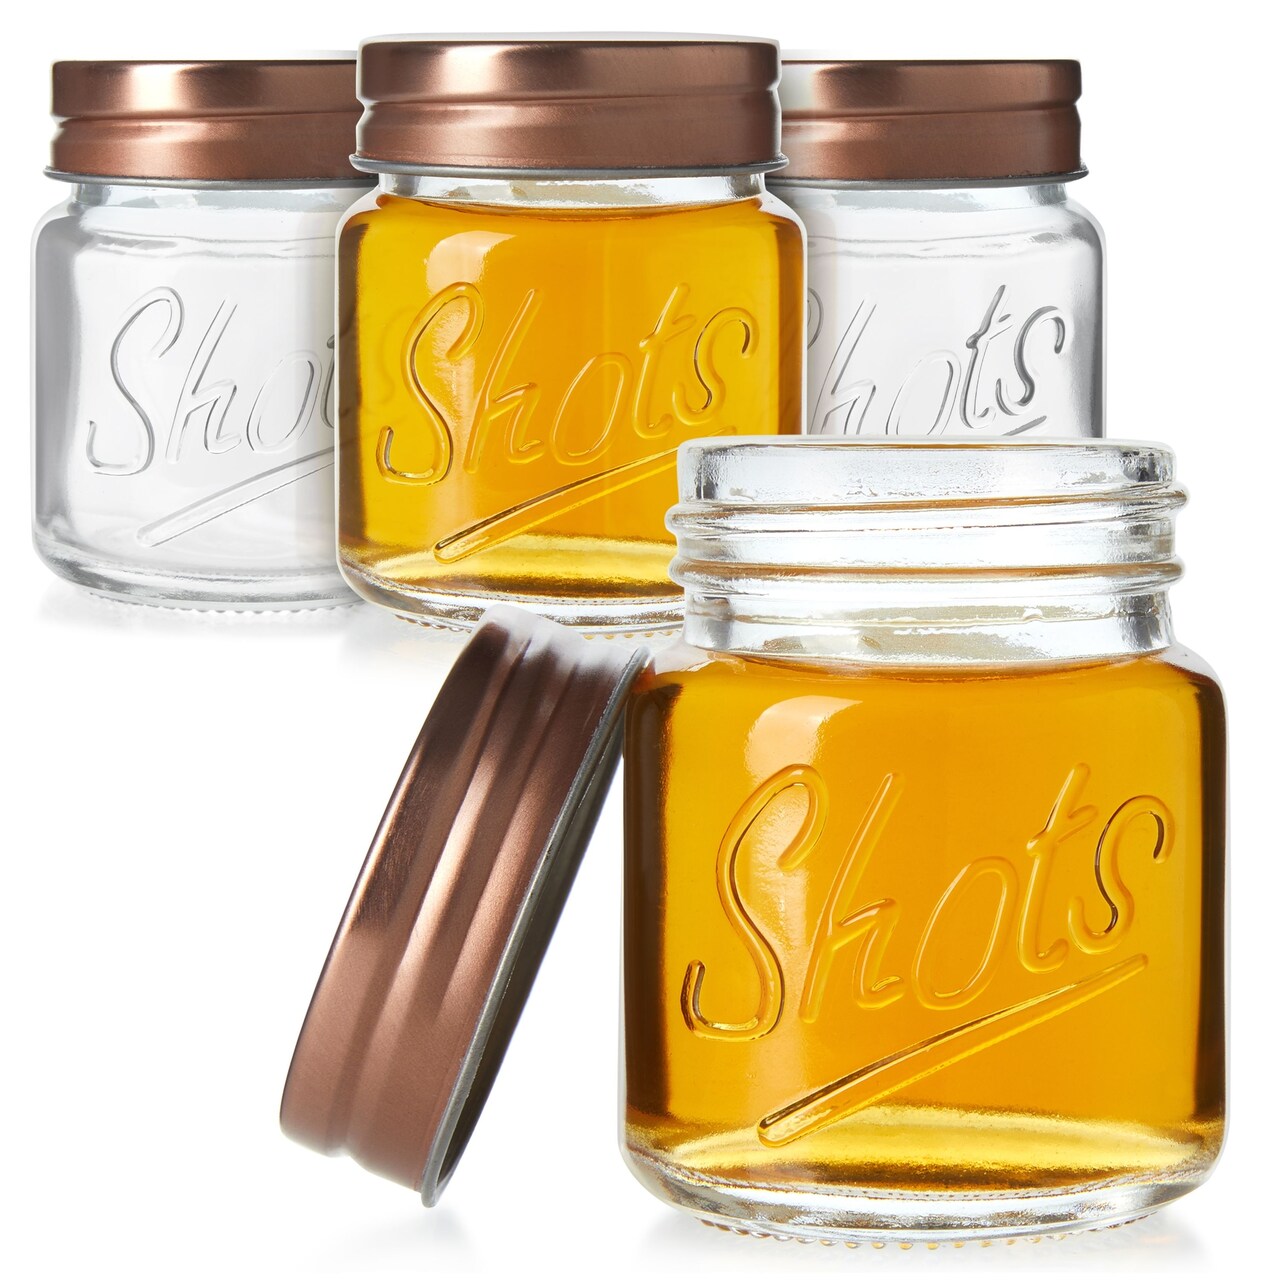 12-Pack Mini Mason Jar Shot Glasses with Lids, Bulk 2 Ounce Glasses for  Ginger Shots, Juices, Cocktails, Homemade Sauces, Honey, Jams, Salad  Dressings, and Spices